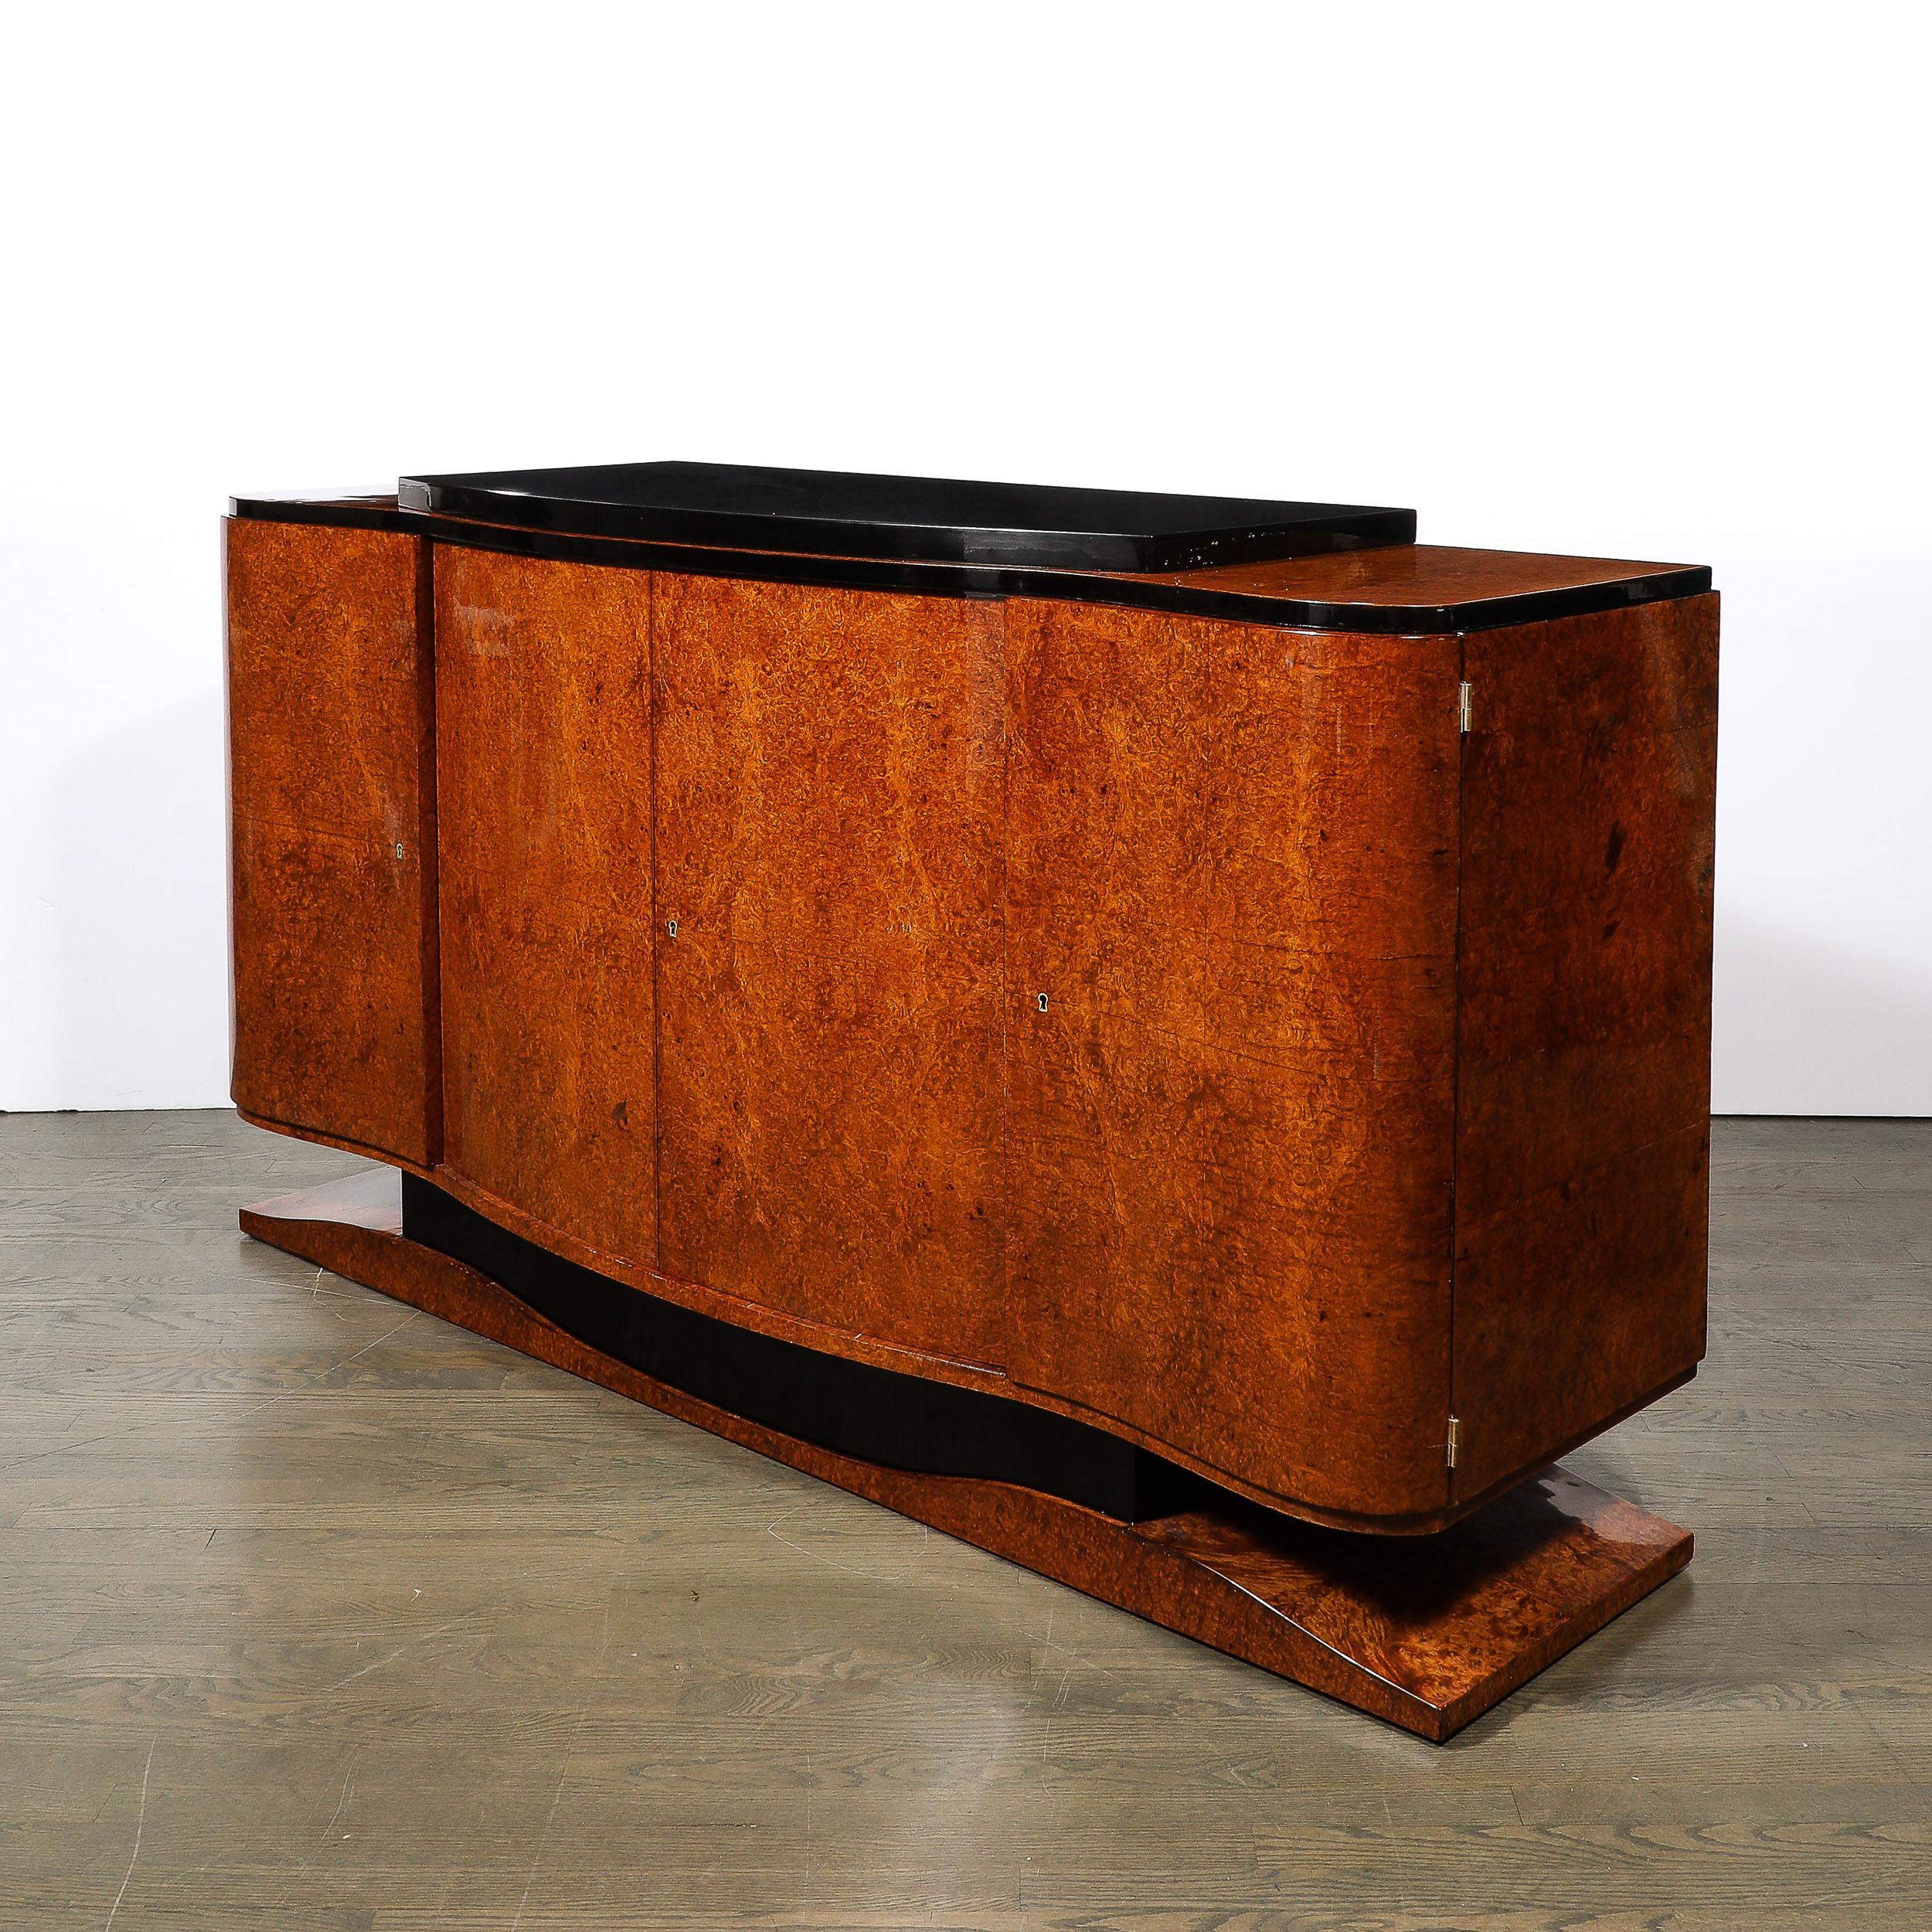 This elegant and exquisitely made Art Deco Sideboard in Burled and Bookmatched Amboyna Wood W/Black Lacquer Detailing and Plinth Base originates from France, Circa 1935. Features a wonderful compostion of elegant curves and well proportioned